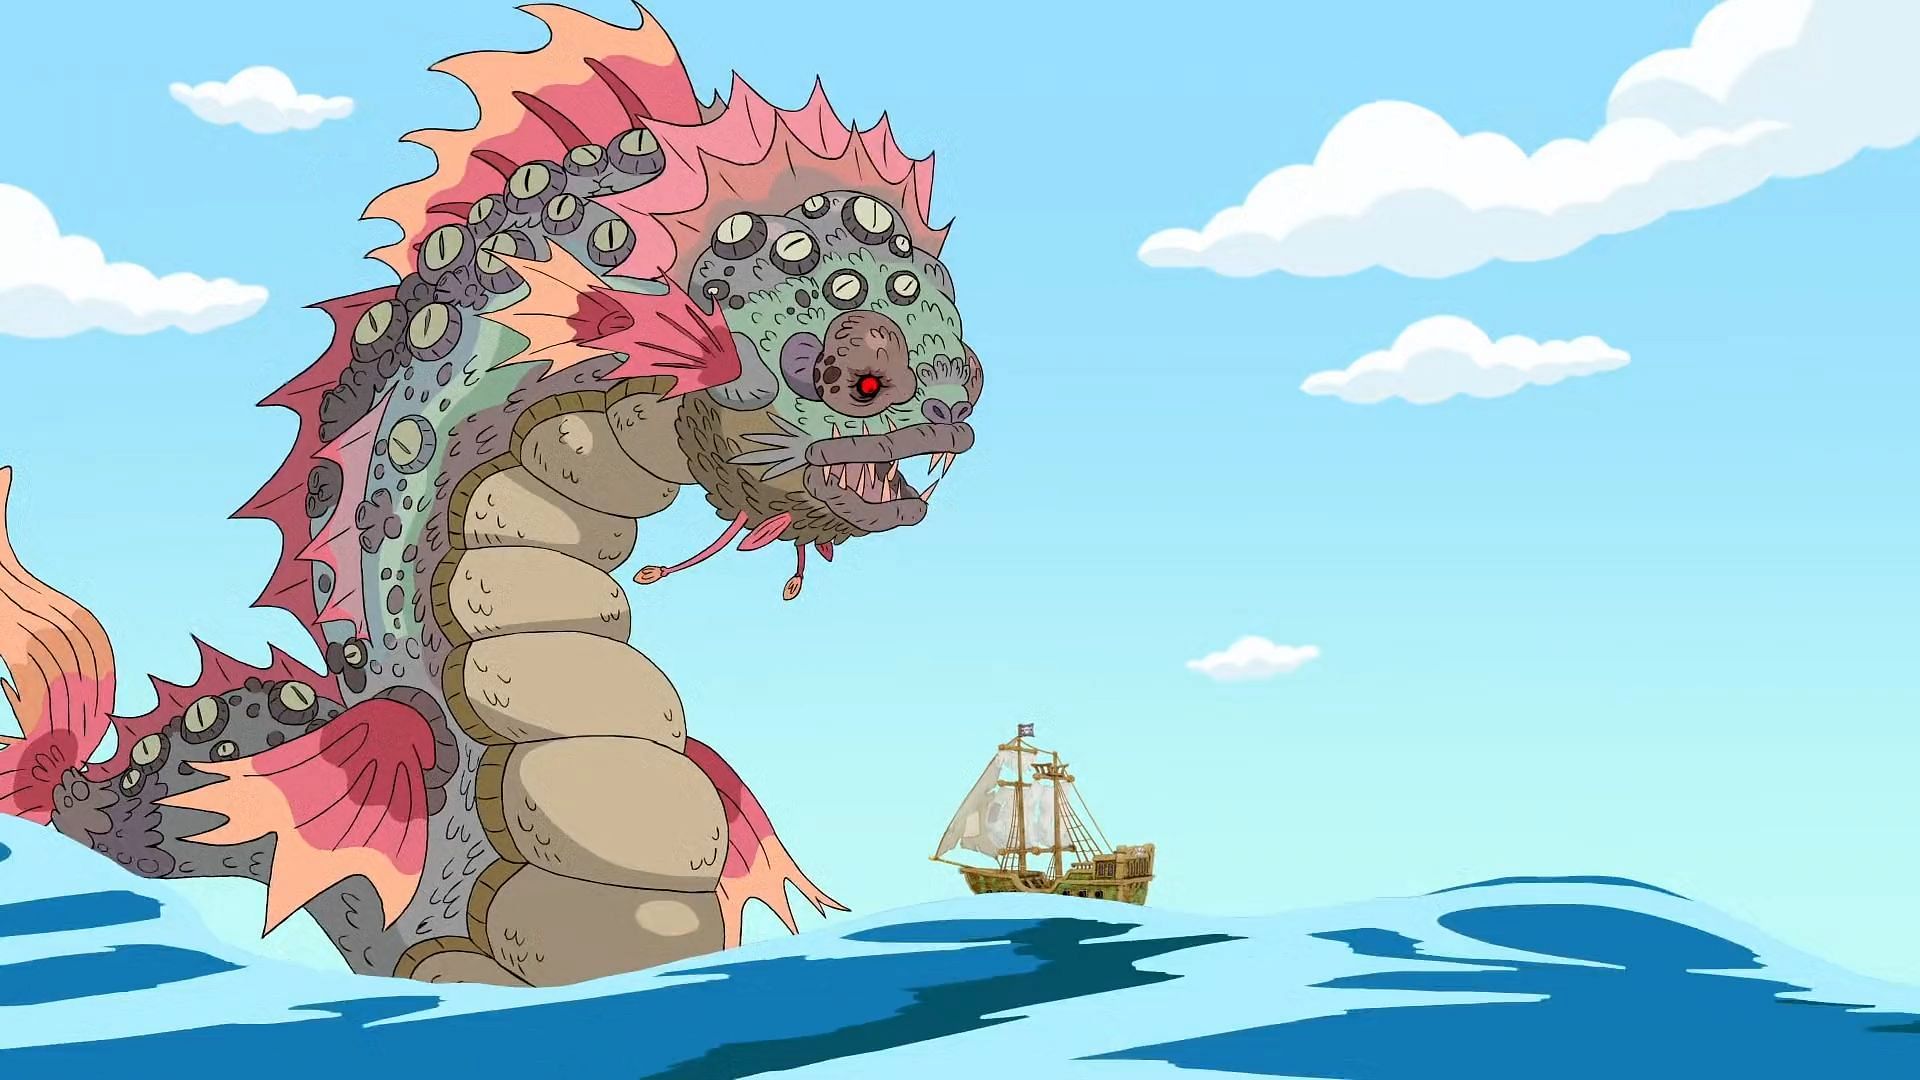 A Leviathan as seen in Smiling Friends (Image via Max)